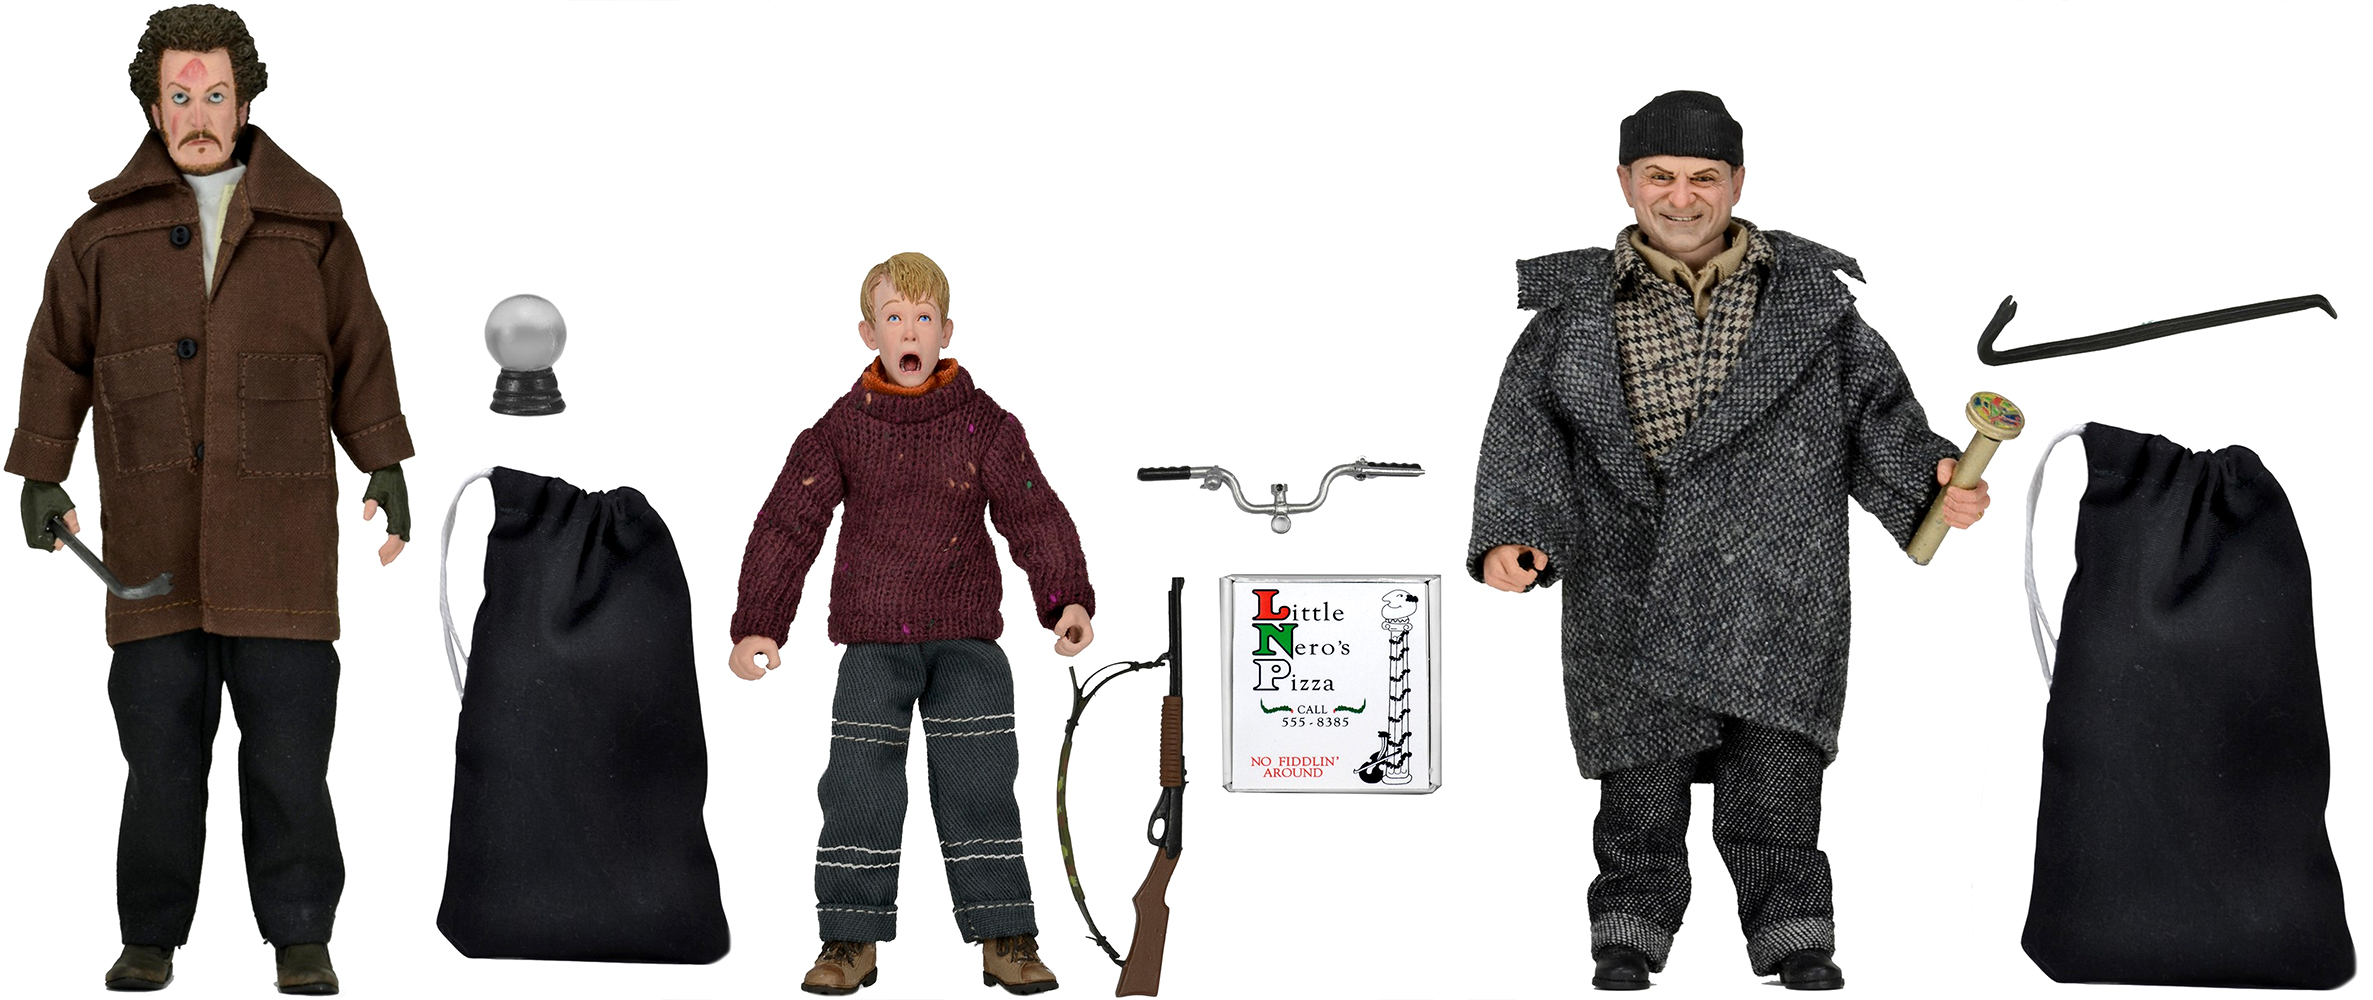 The Home Alone Figures You’ve Waited 25 Years For Are Finally Here